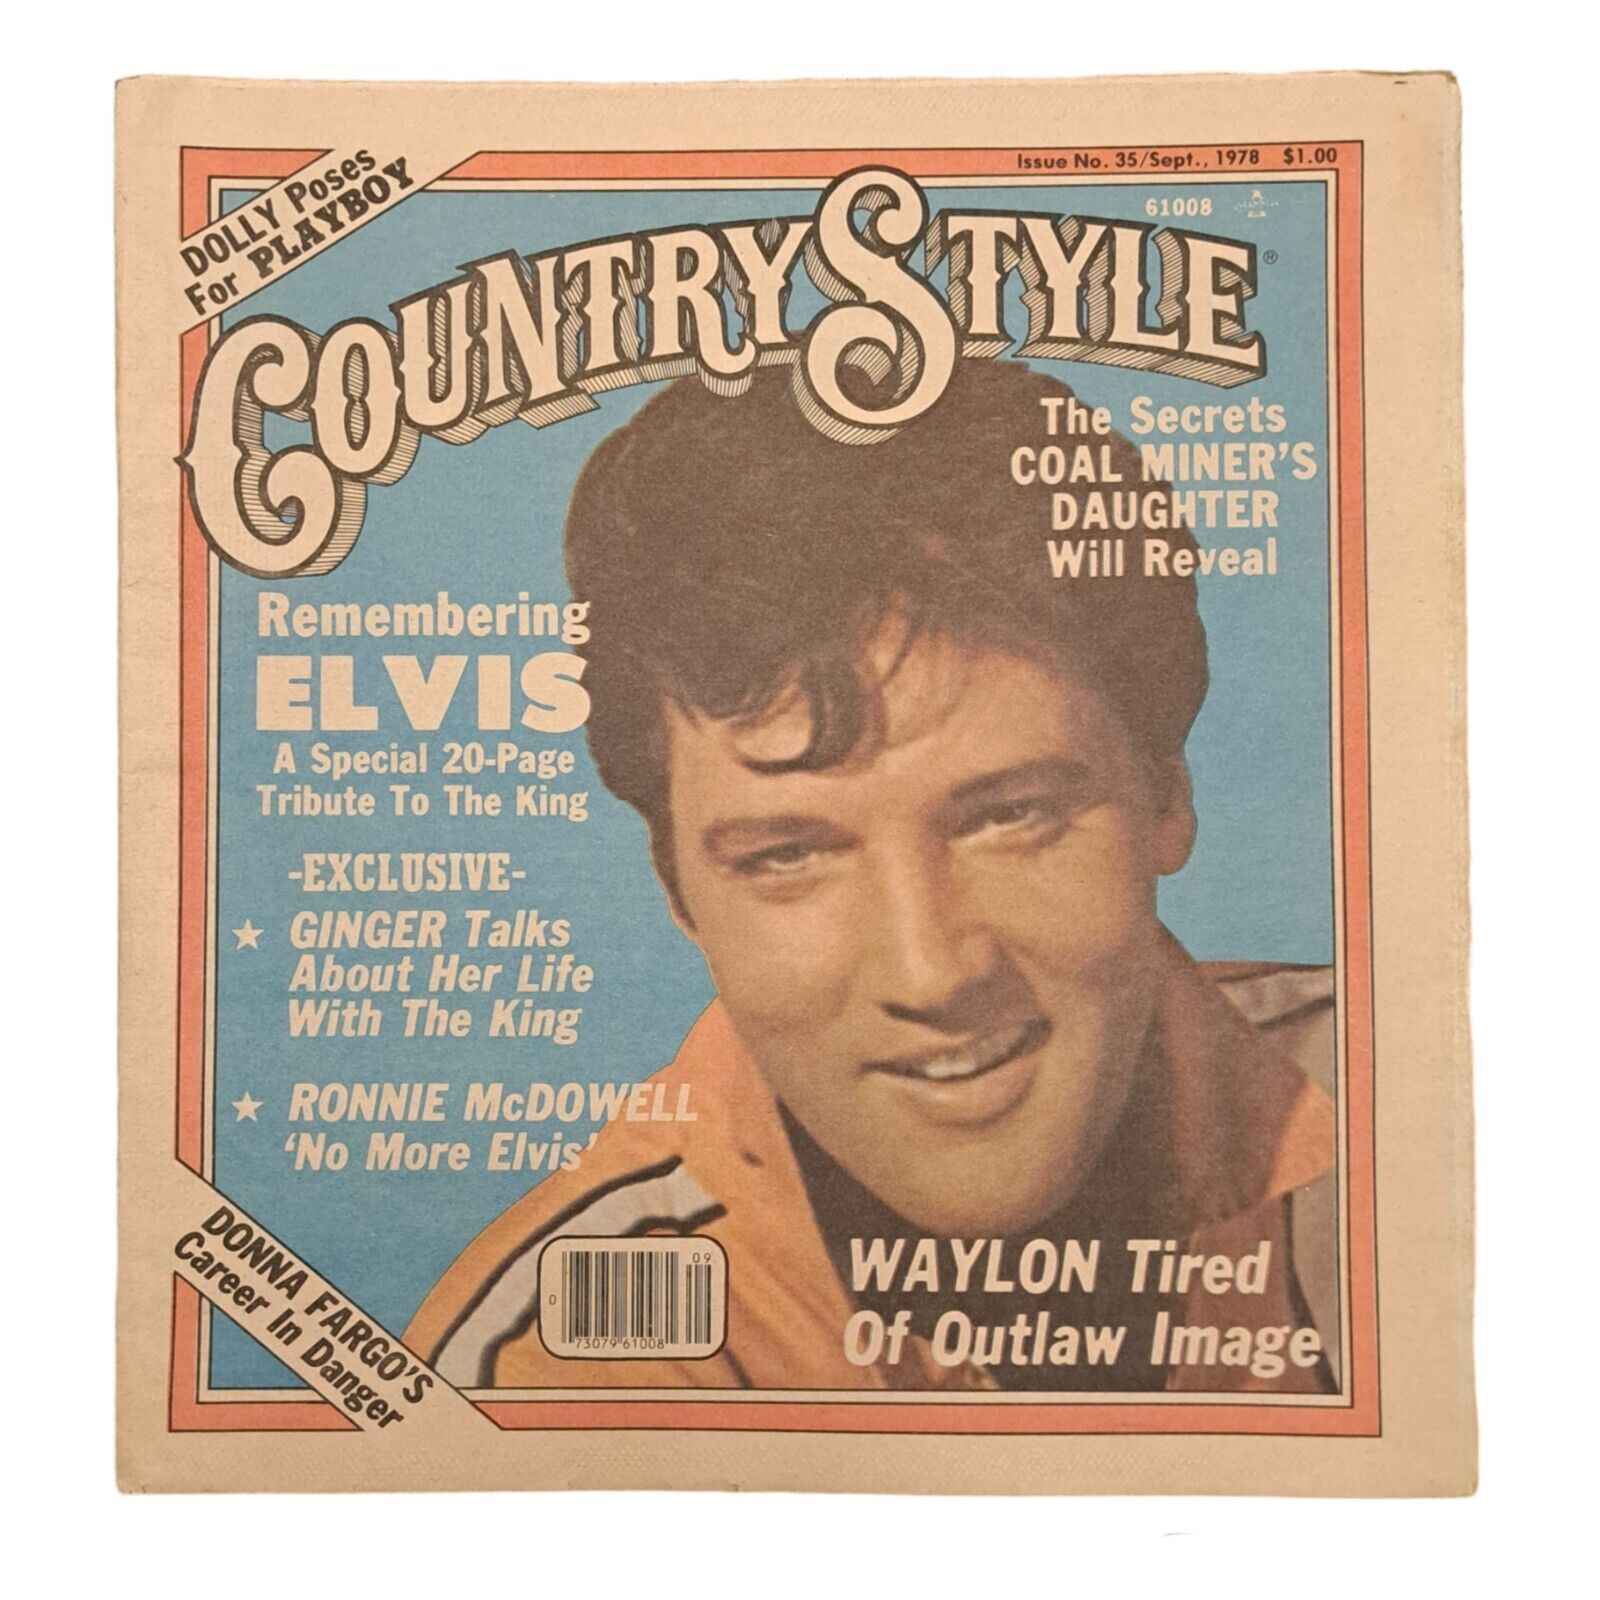 Vintage 1978 SEP COUNTRY STYLE NEWSPAPER - REMEMBERING ELVIS, 20-PAGE TRIBUTE